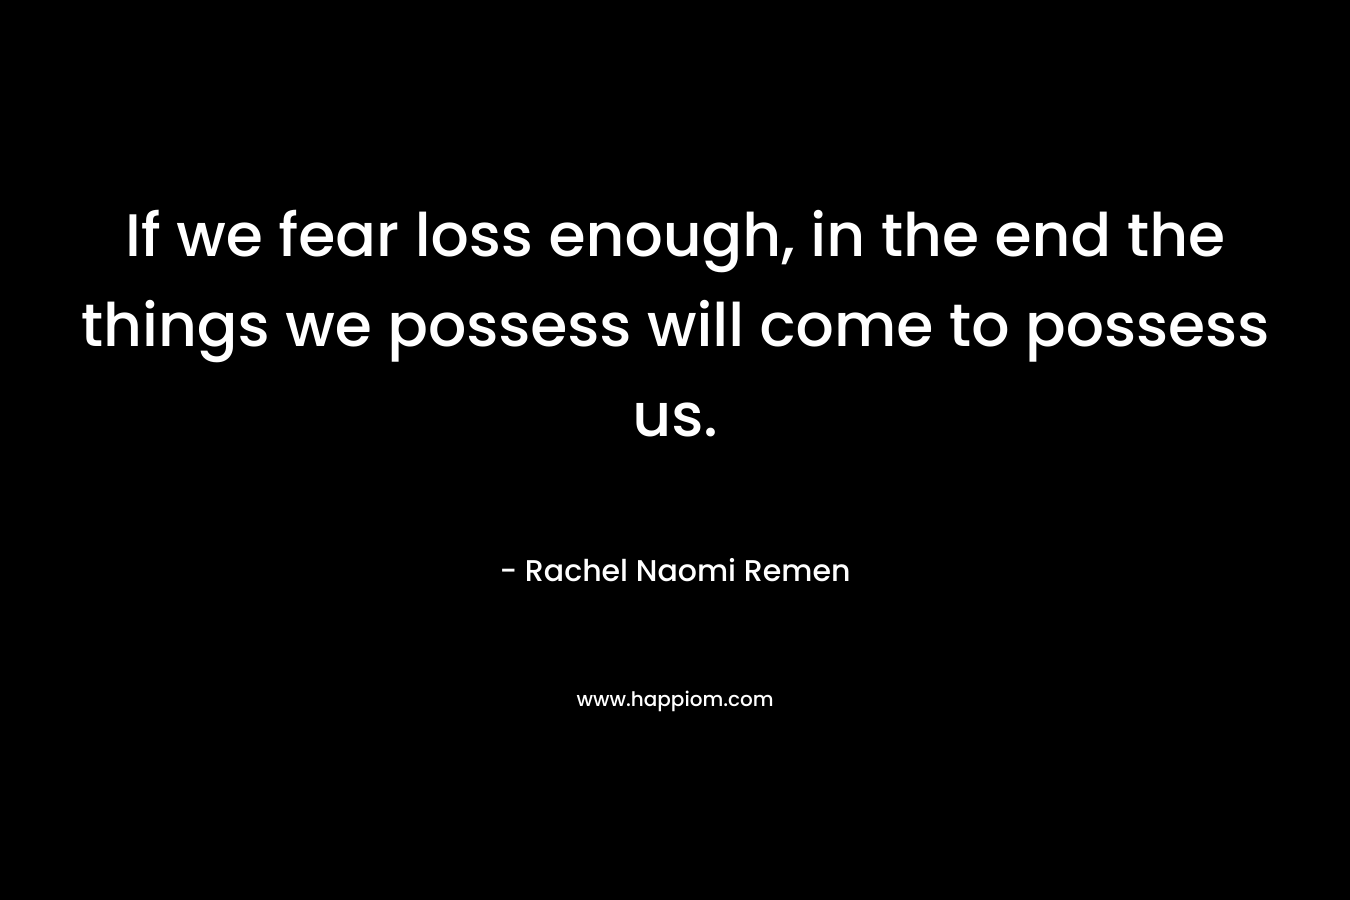 If we fear loss enough, in the end the things we possess will come to possess us. – Rachel Naomi Remen